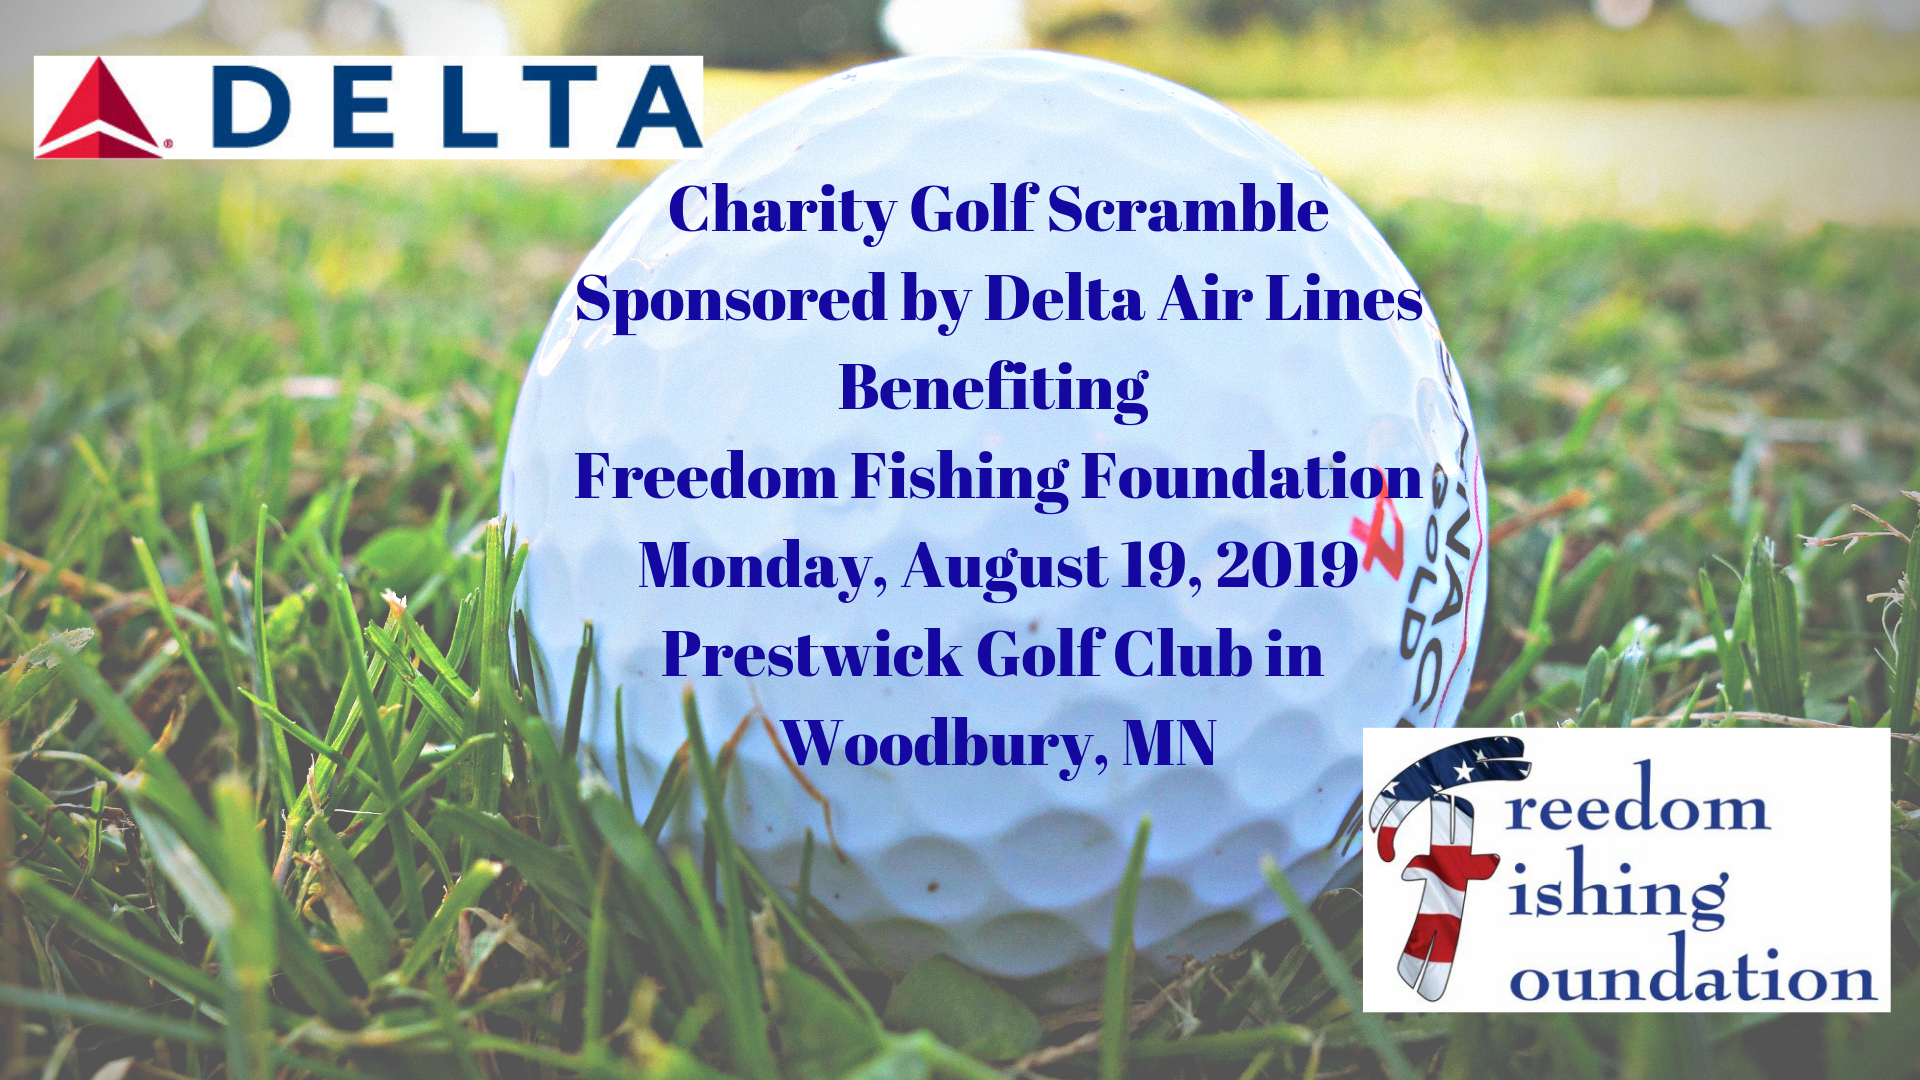 2019 Charity Golf Scramble Sponsored by Delta Air Lines